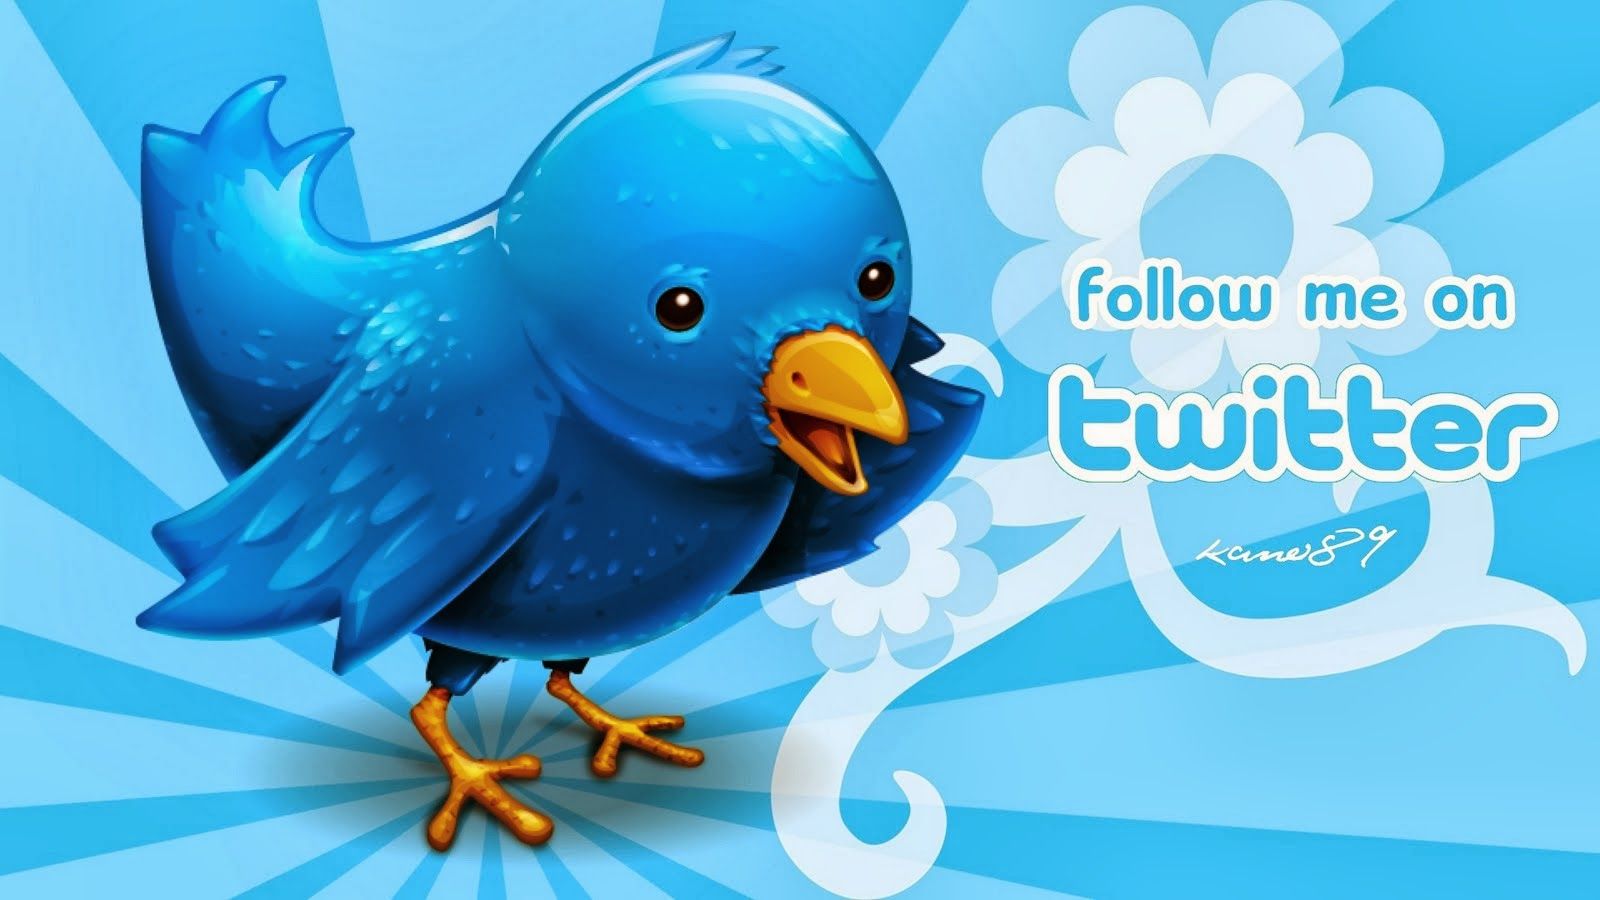 Twitter Hd Wallpapers - Background Wallpapers For Twitter , HD Wallpaper & Backgrounds